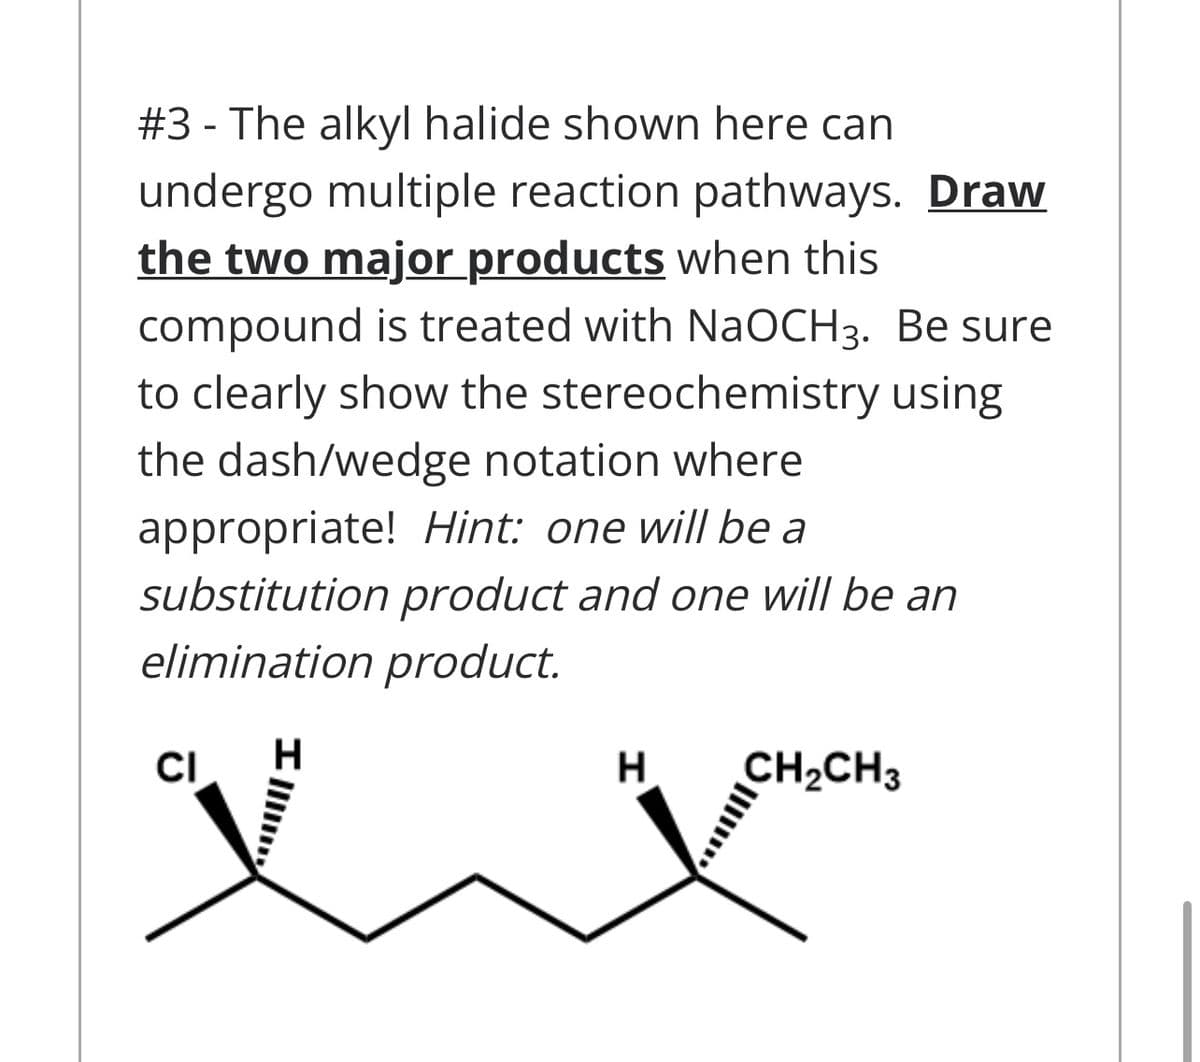 #3 - The alkyl halide shown here can
undergo multiple reaction pathways. Draw
the two major products when this
compound is treated with NaOCH3. Be sure
to clearly show the stereochemistry using
the dash/wedge notation where
appropriate! Hint: one will be a
substitution product and one will be an
elimination product.
CI
H.
CH2CH3
